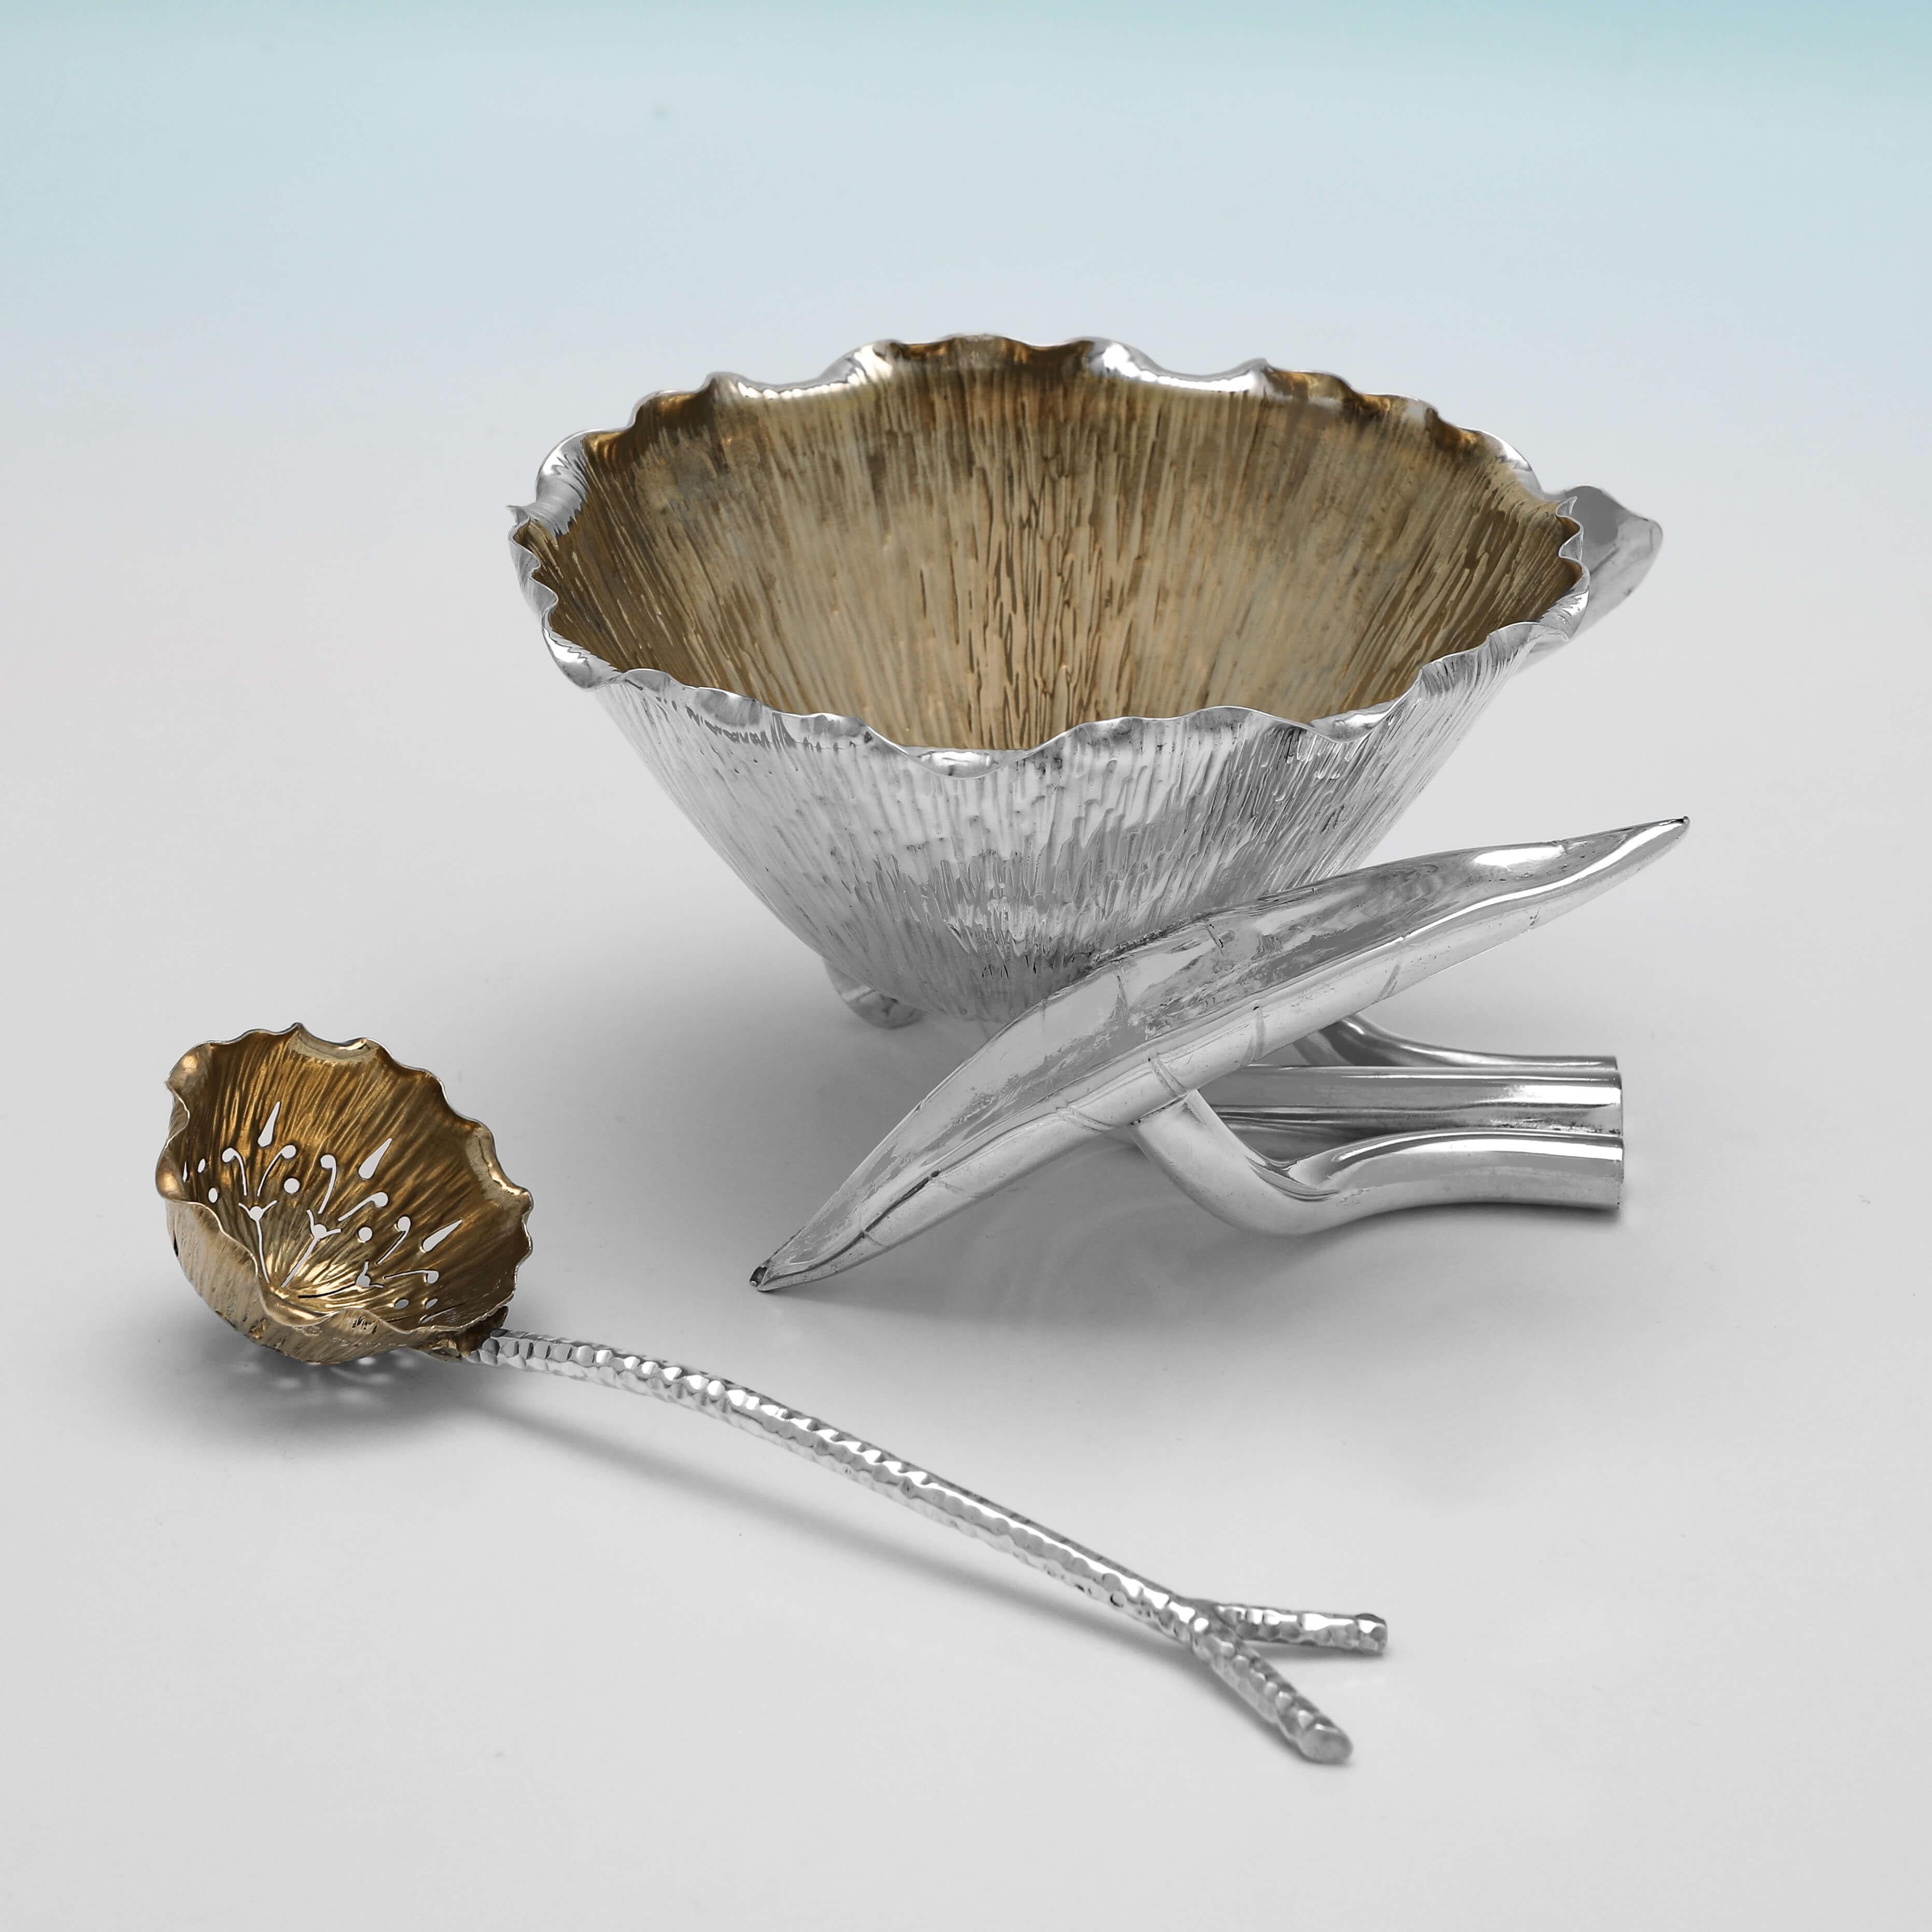 Hallmarked in London in 1902 by Heath & Middleton, this wonderfully designed Antique Sterling Silver Sugar Bowl, takes the form of a blossoming lotus flower, supported on the stems of two curled leaves, and accompanied by a sugar sifter spoon with a